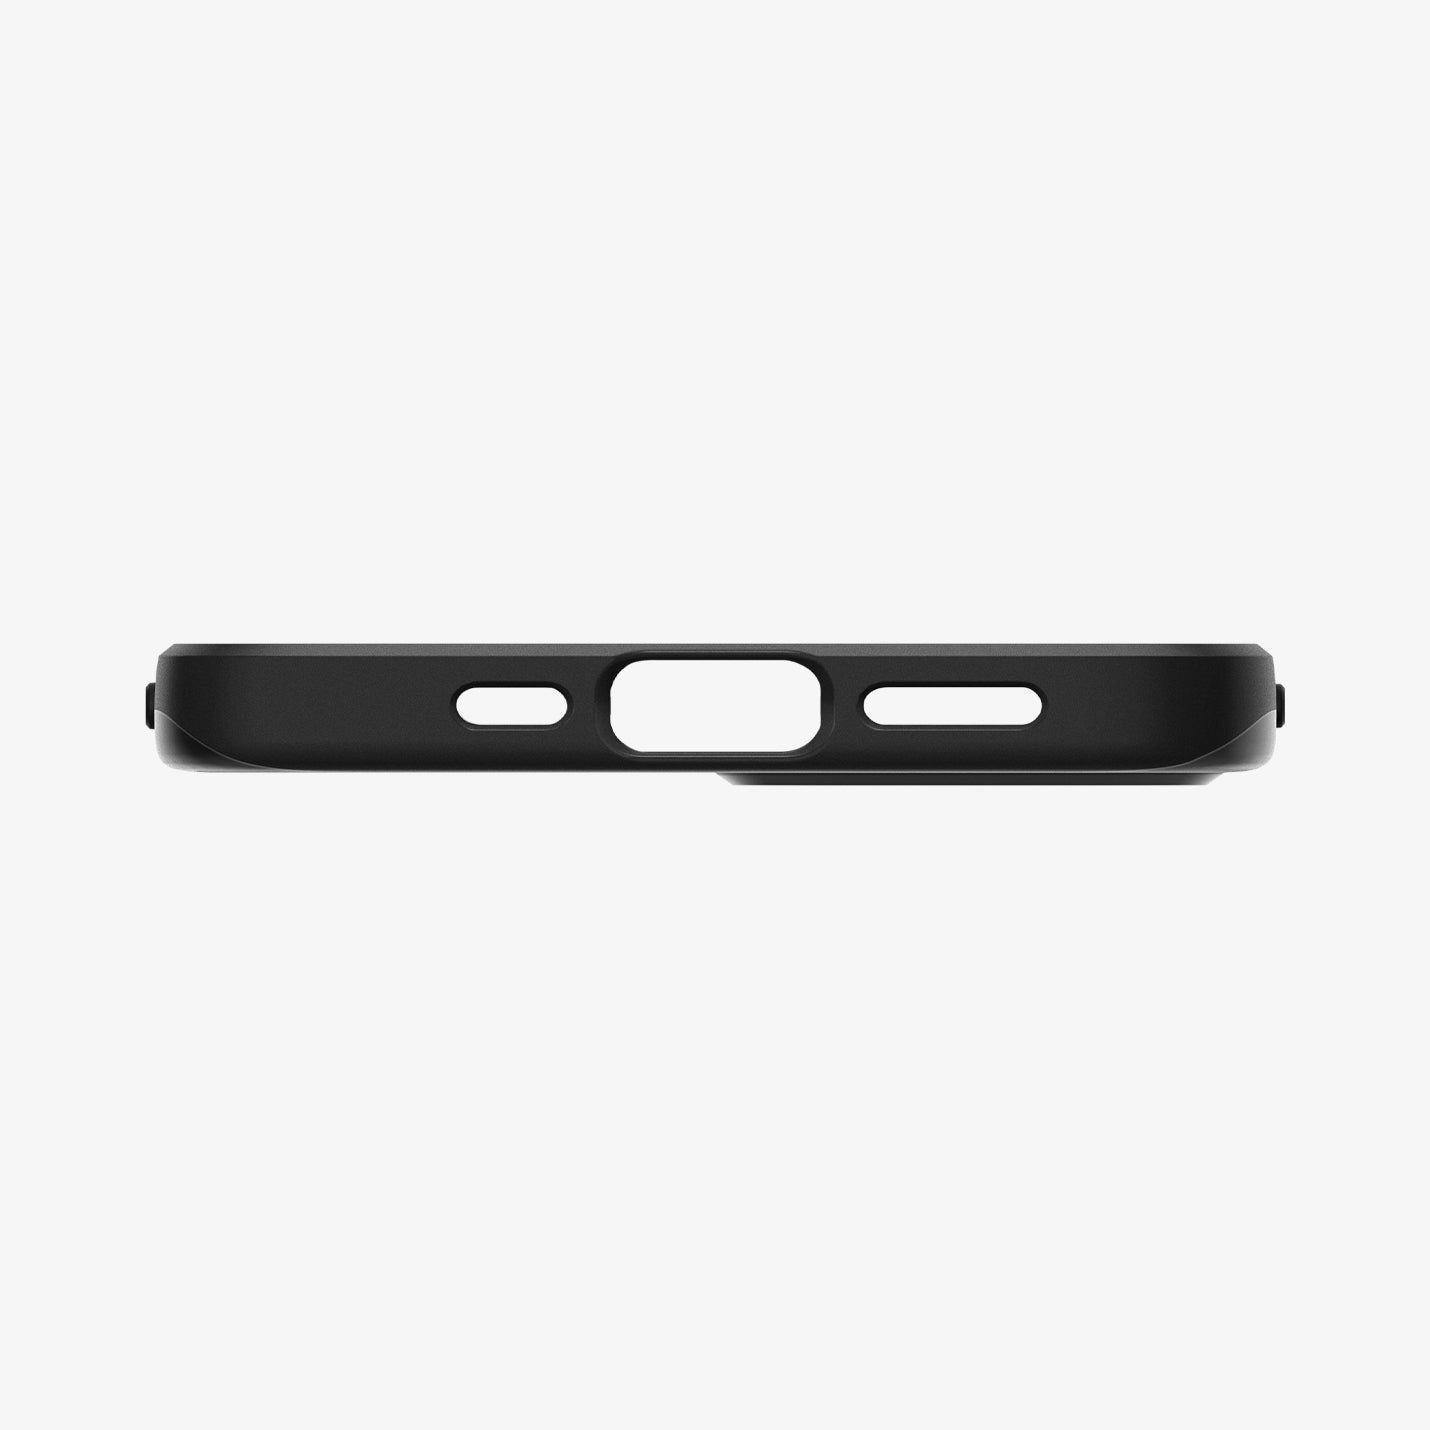 ACS01696 - iPhone 12 / 12 Pro Case Thin Fit in black showing the bottom with precise cutouts